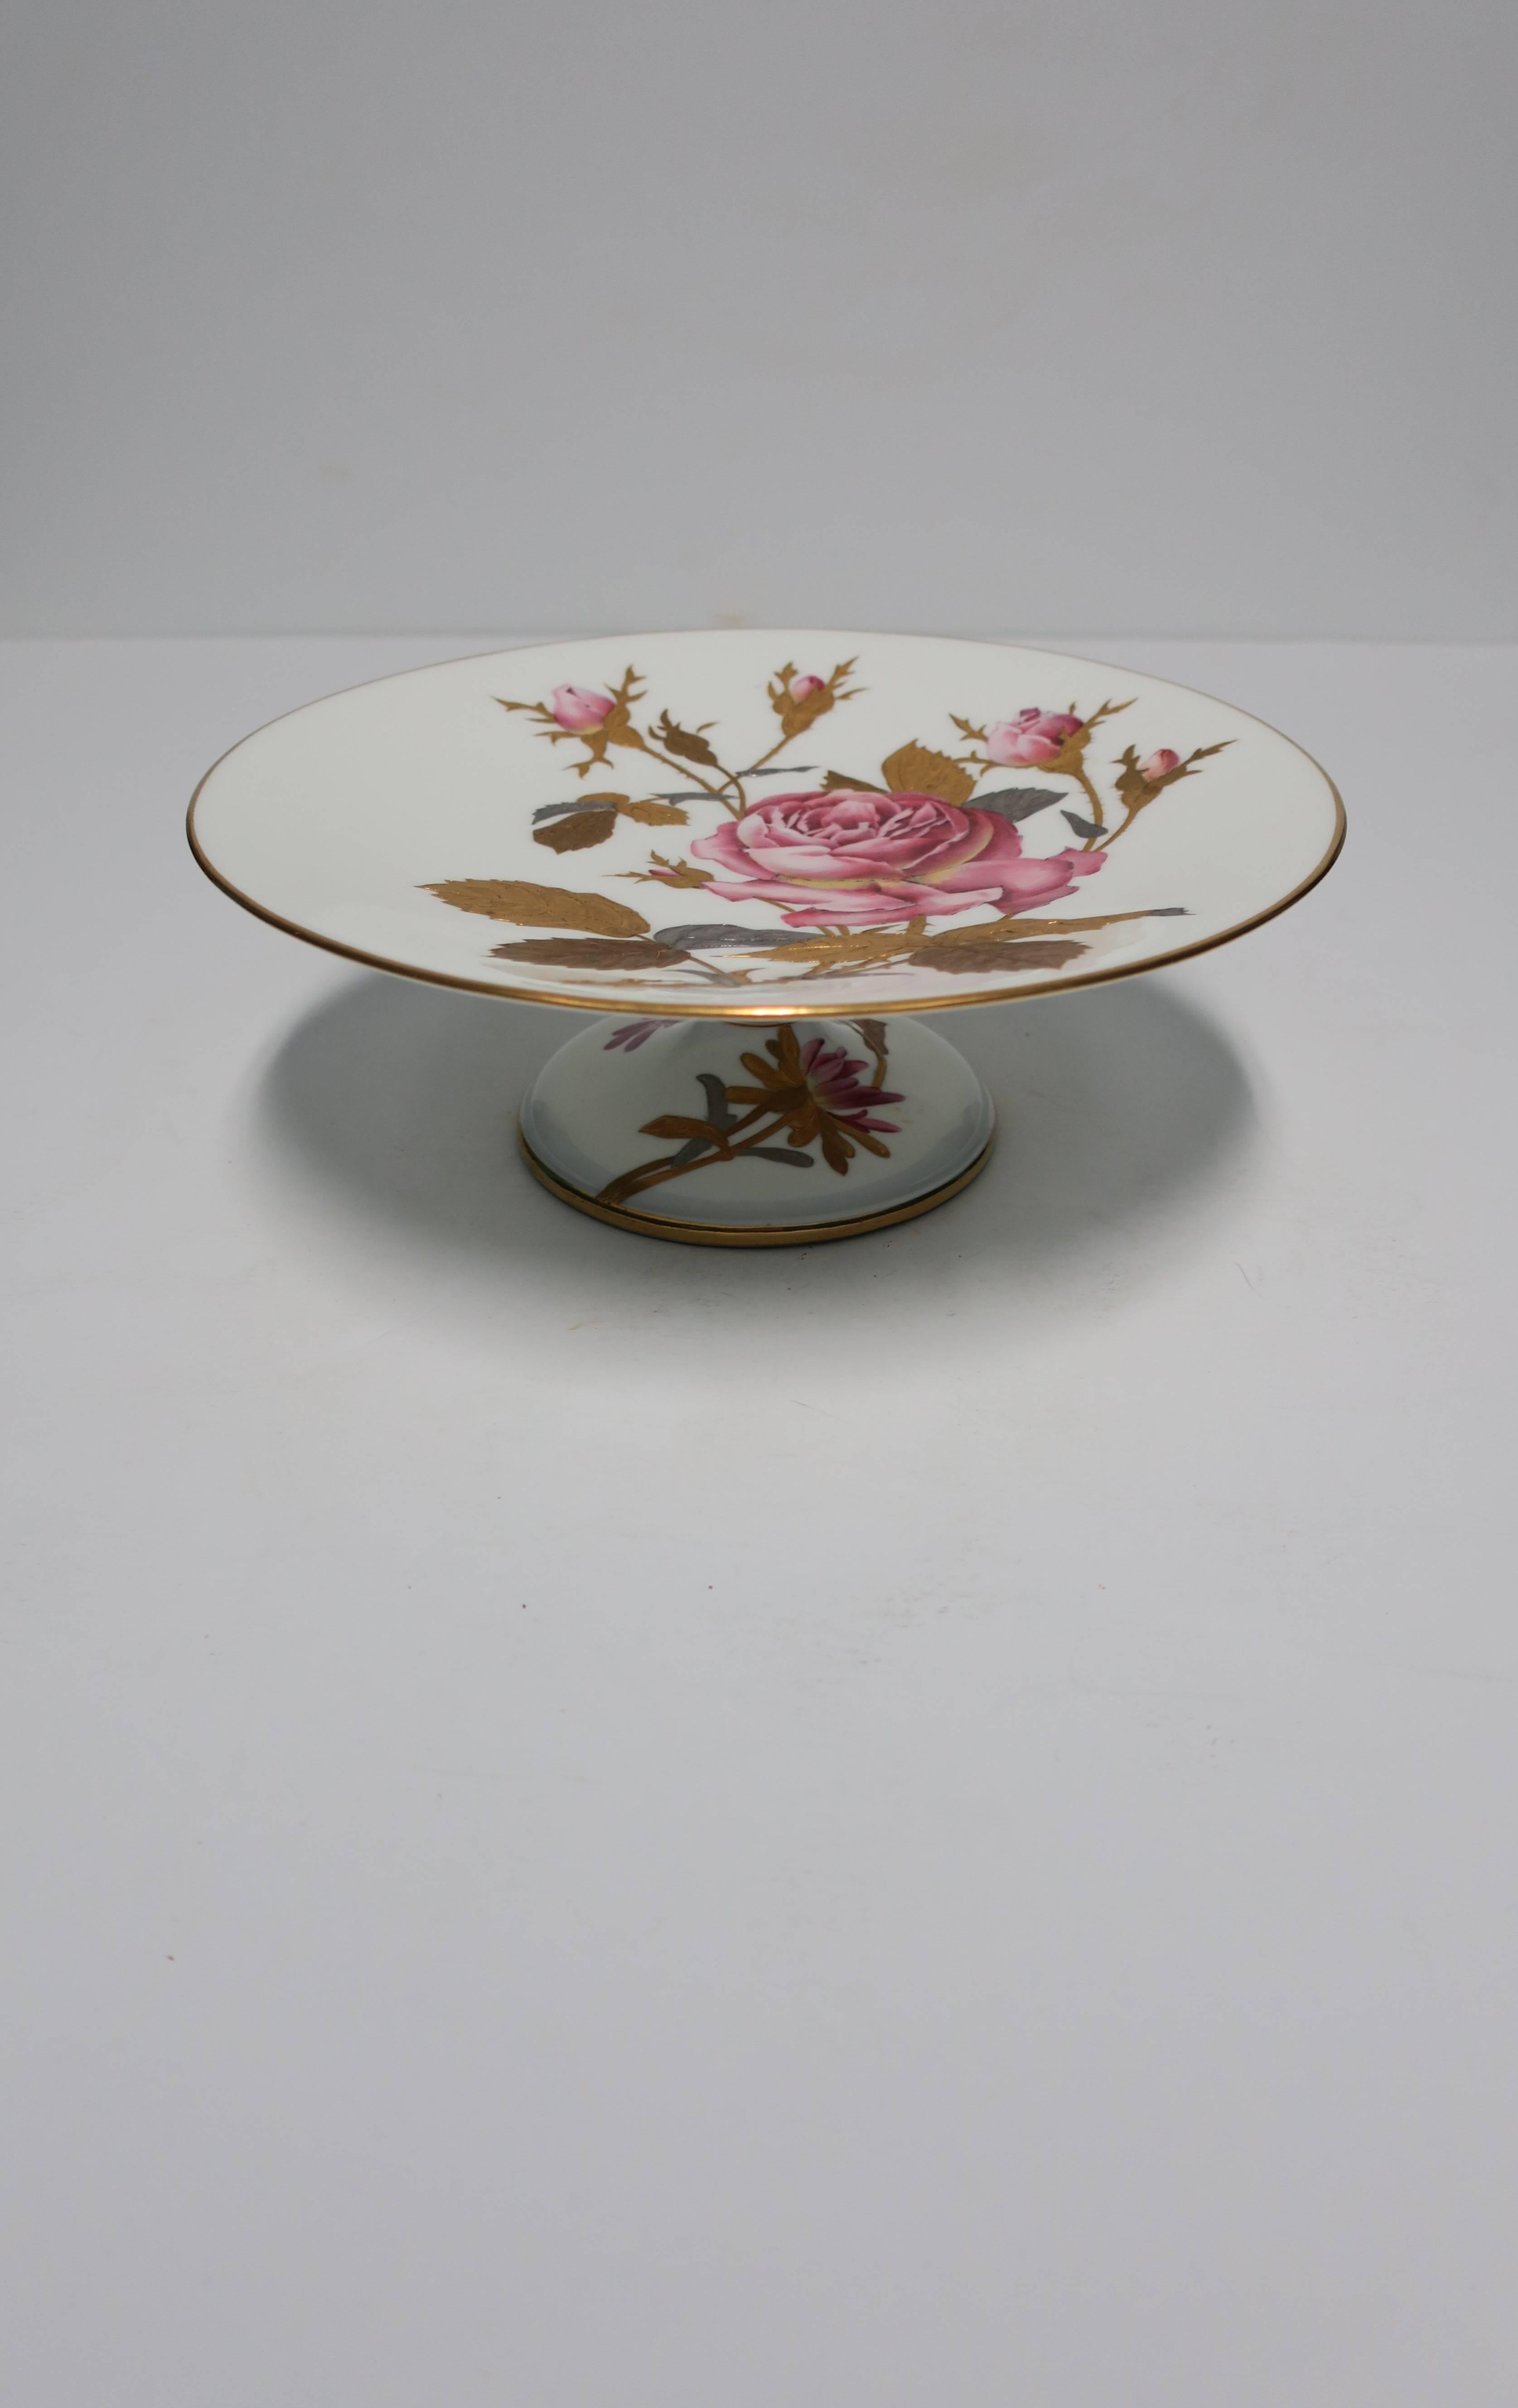 A beautiful European porcelain pedestal compote or dessert / cake plate stand, circa mid-20th century, Europe. Piece is hand painted with pink roses, generously raised gilt in gold, silver, and copper leaves, finished with a gold trim around edge